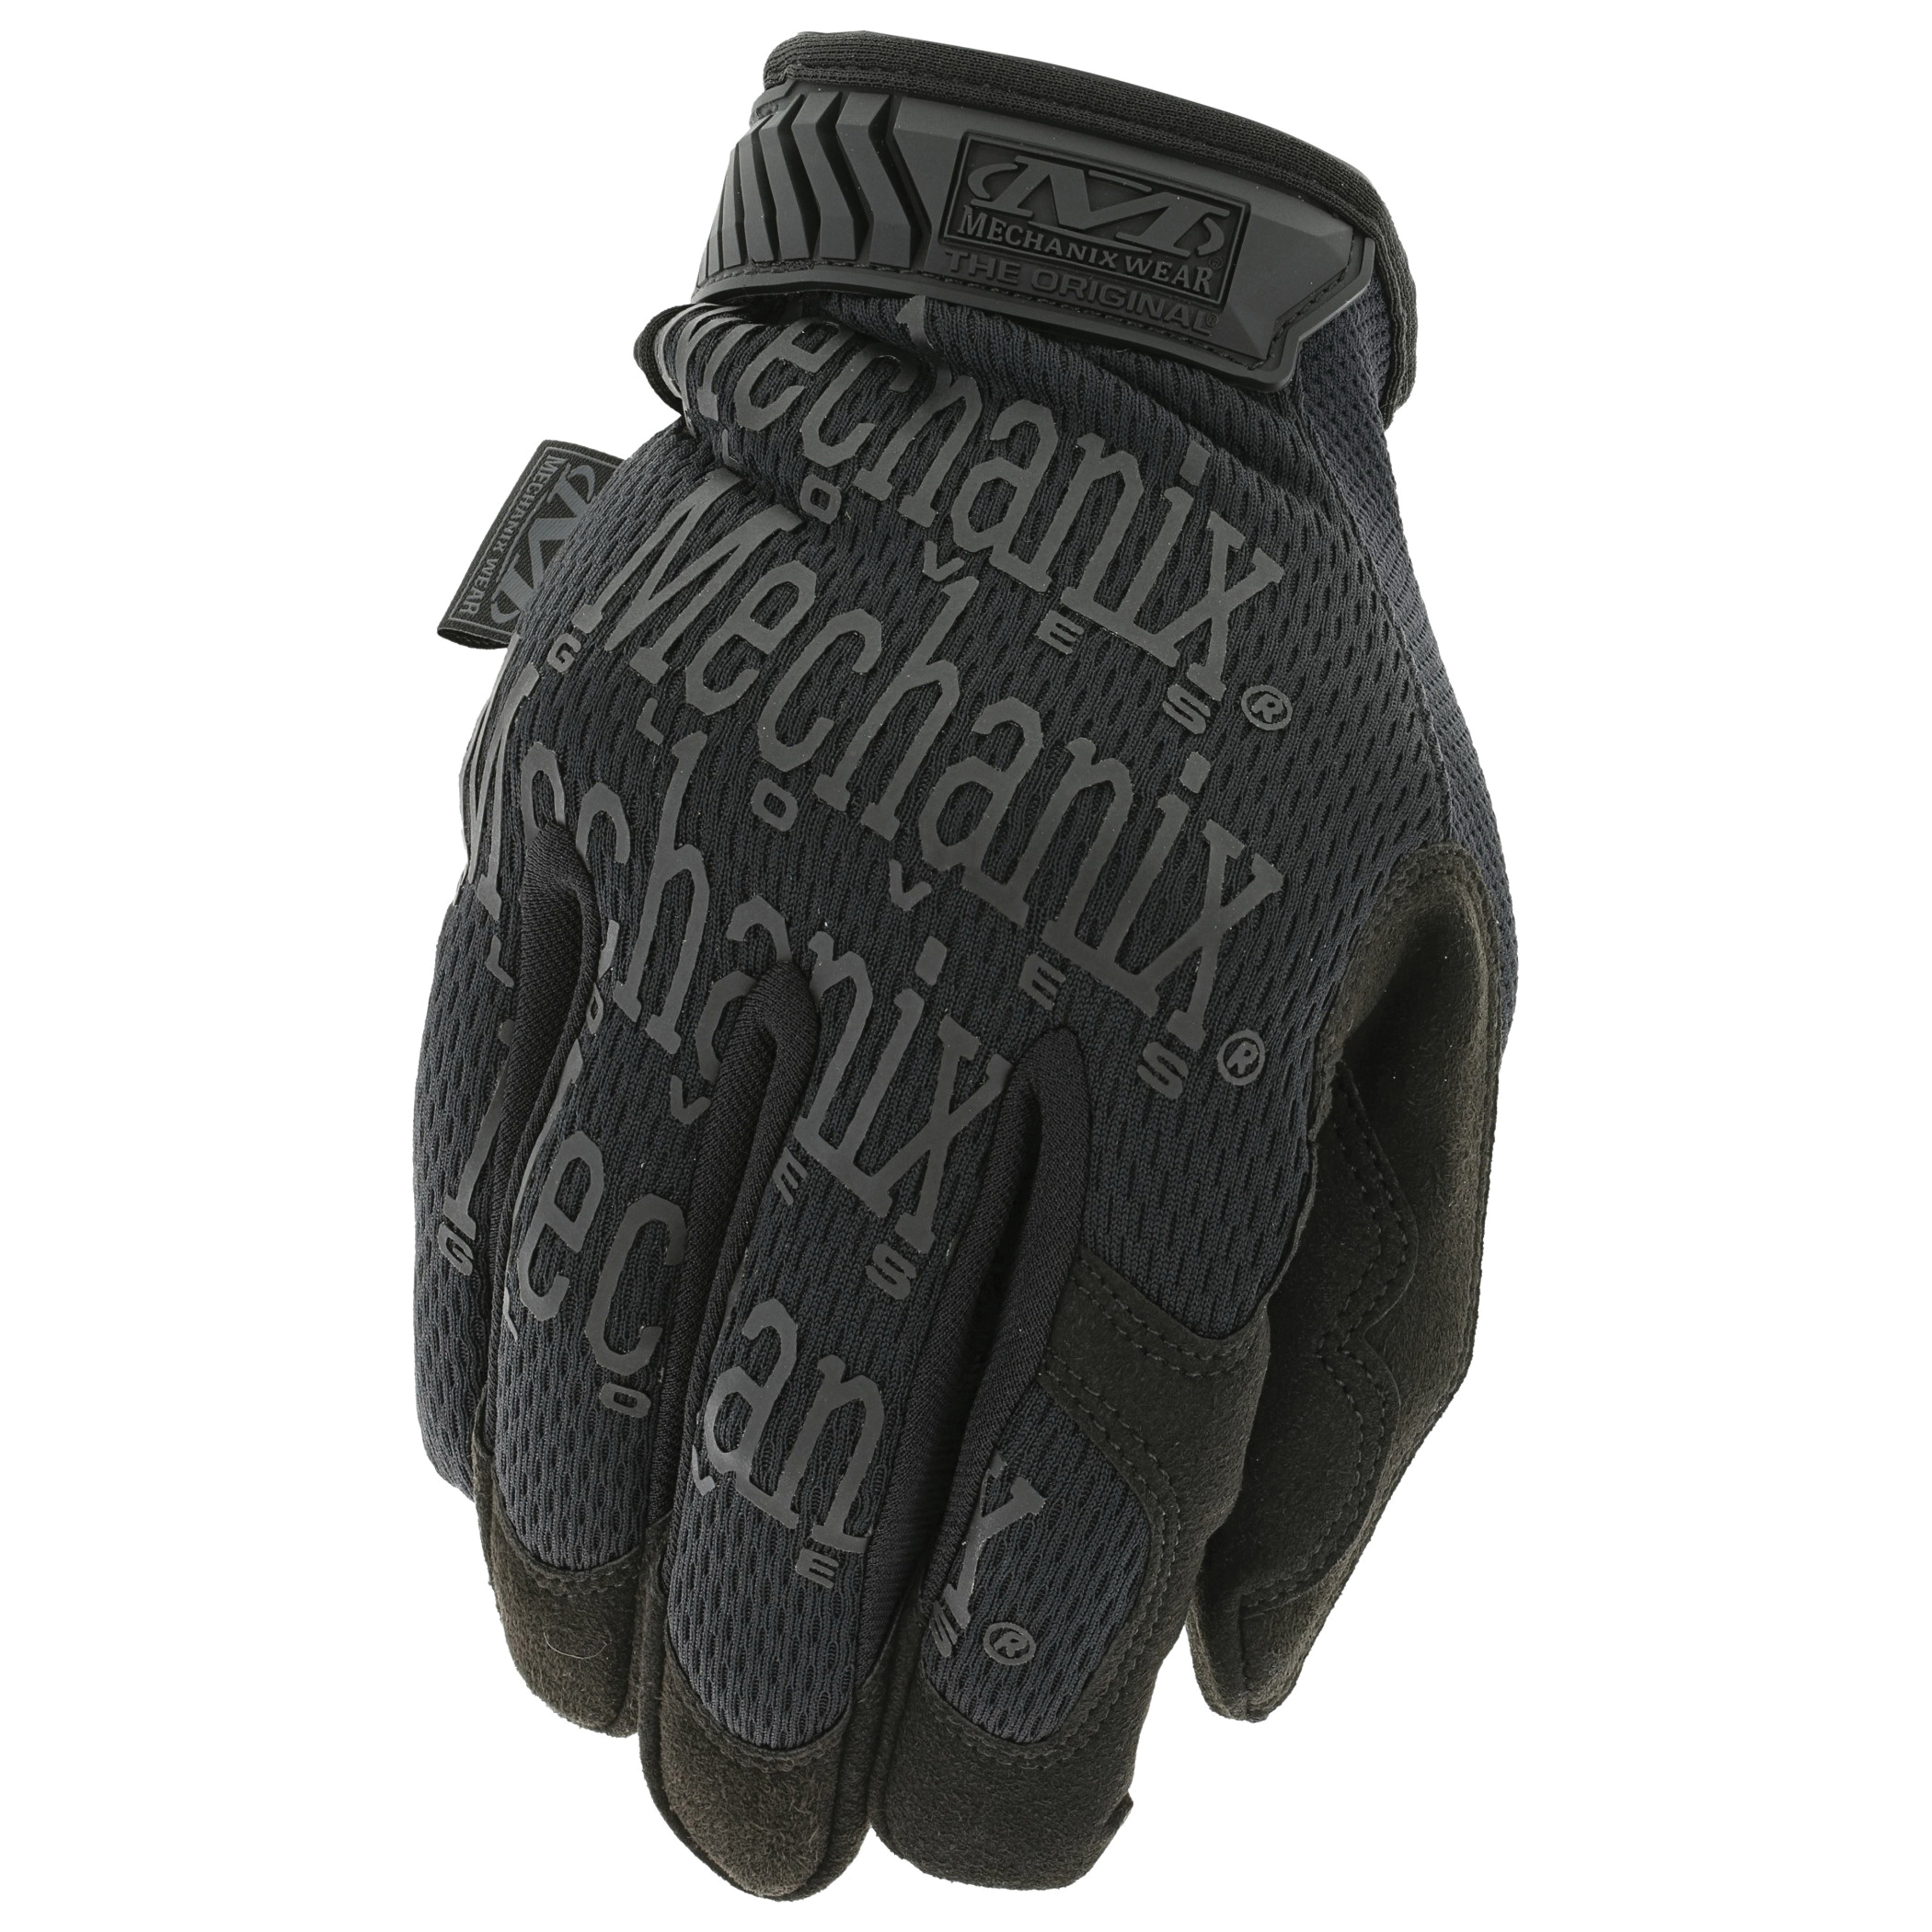 Mechanix Wear® The Original® 484-MG-95-011 Tactical Gloves, XL, Reinforced Thumb, Synthetic Leather Glove, Covert Glove